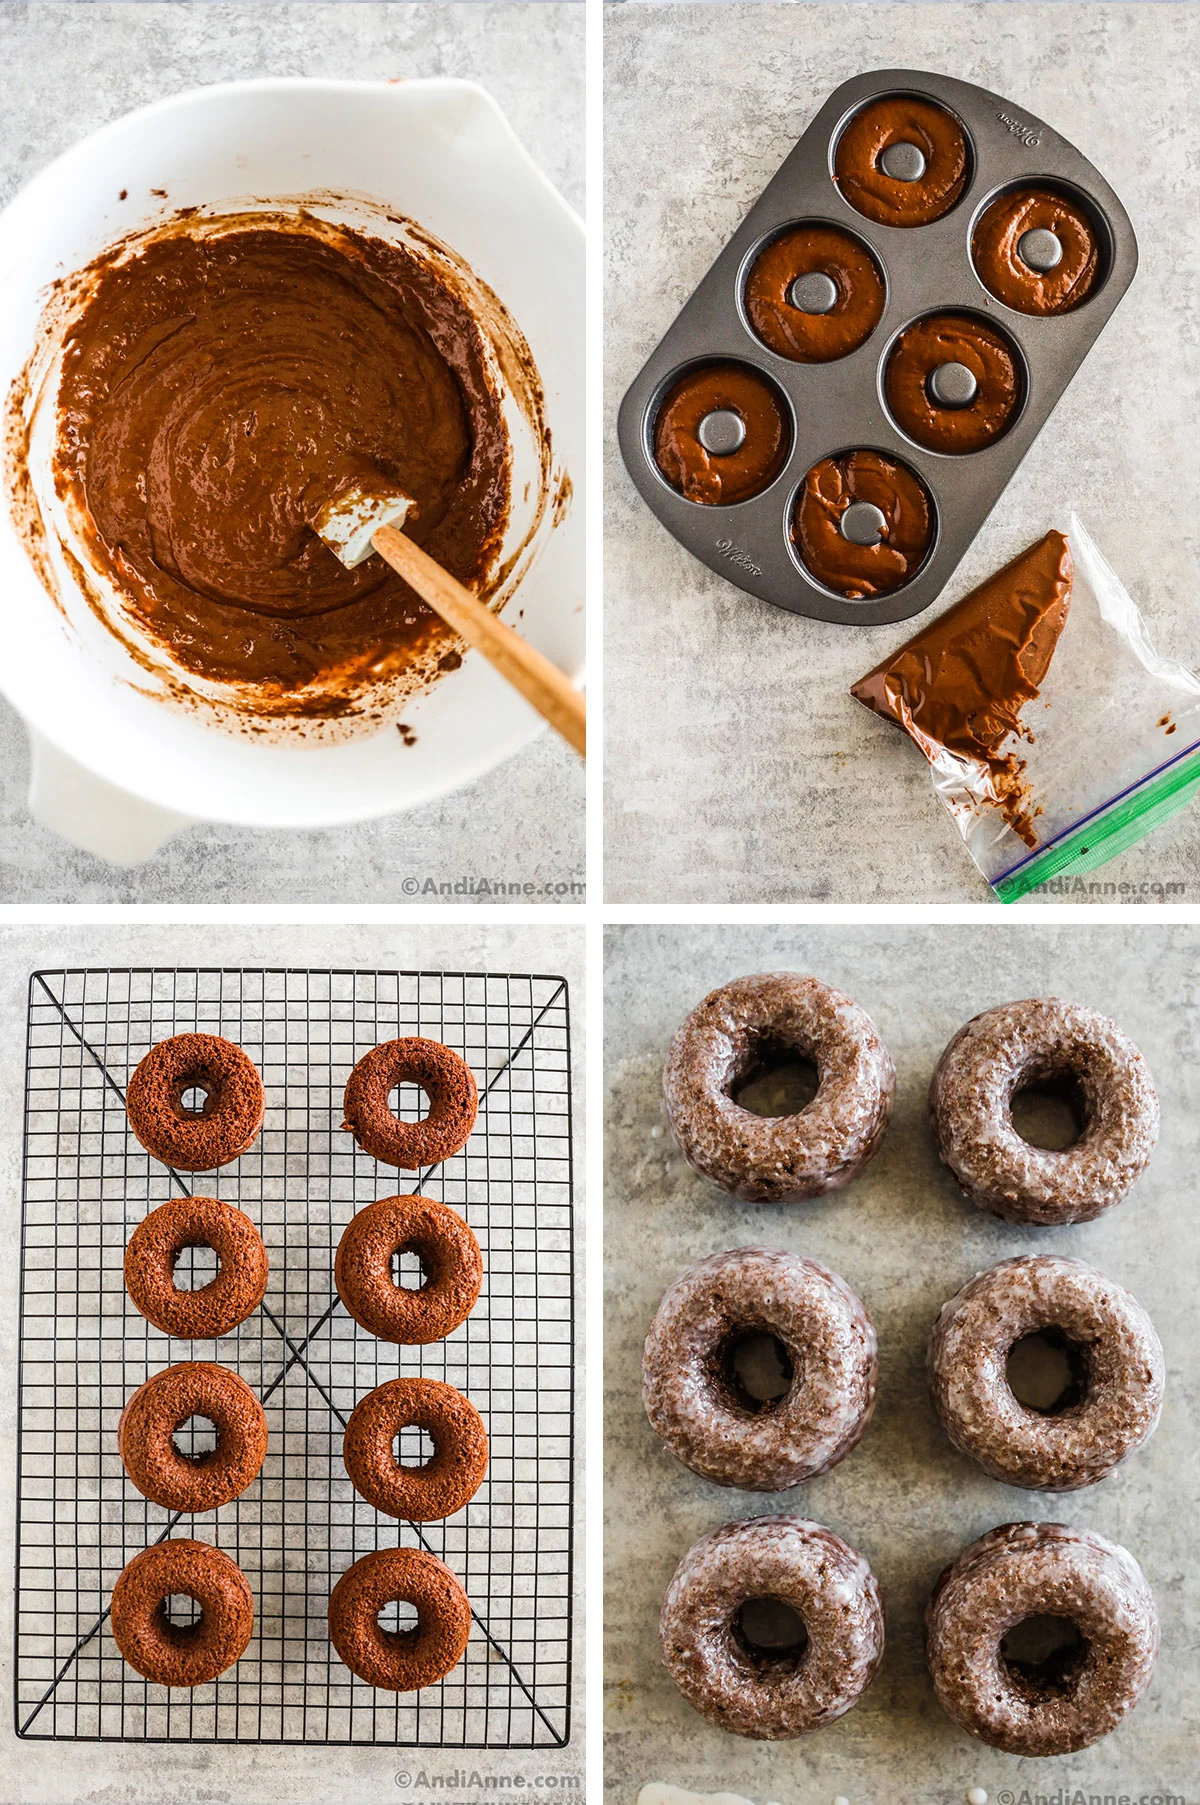 Four images grouped together including a bowl of chocolate batter, a donut pan with batter and plastic bag with batter, baked donuts on a cooling rack, and dipped glazed chocolate donuts on a counter.